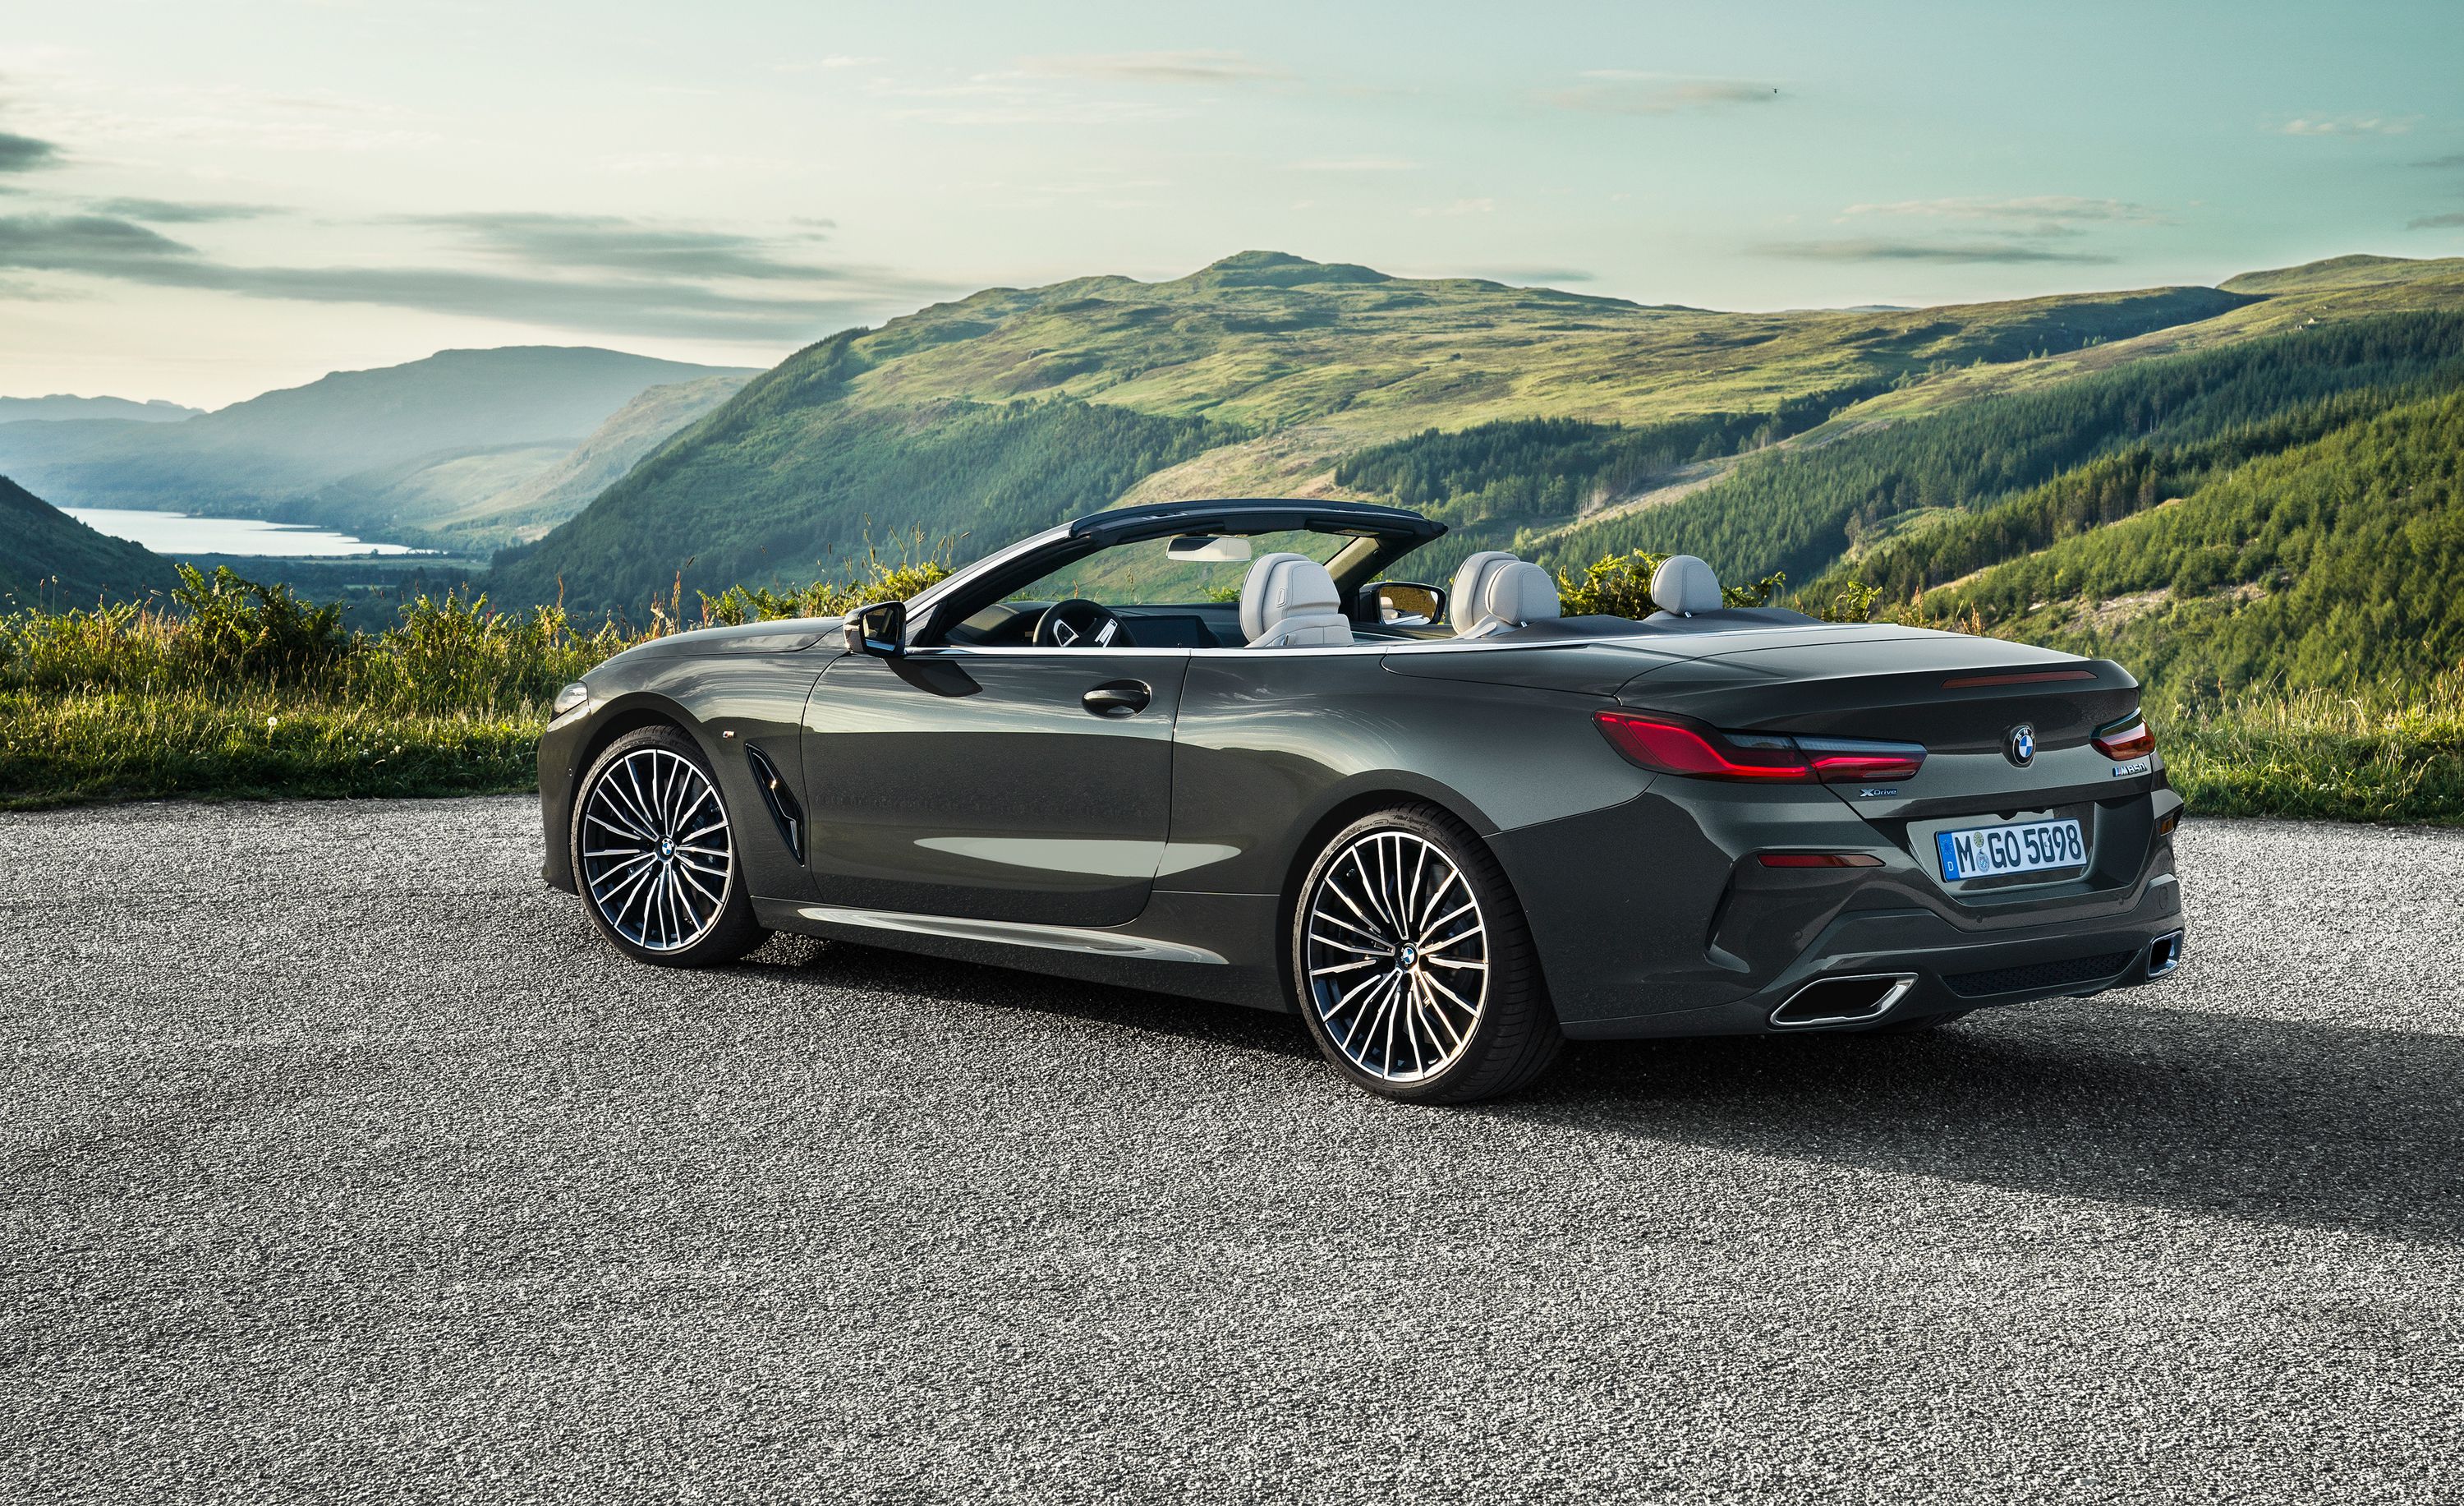 The 2019 BMW 8 Series Convertible Is Joining The M850i Coupe